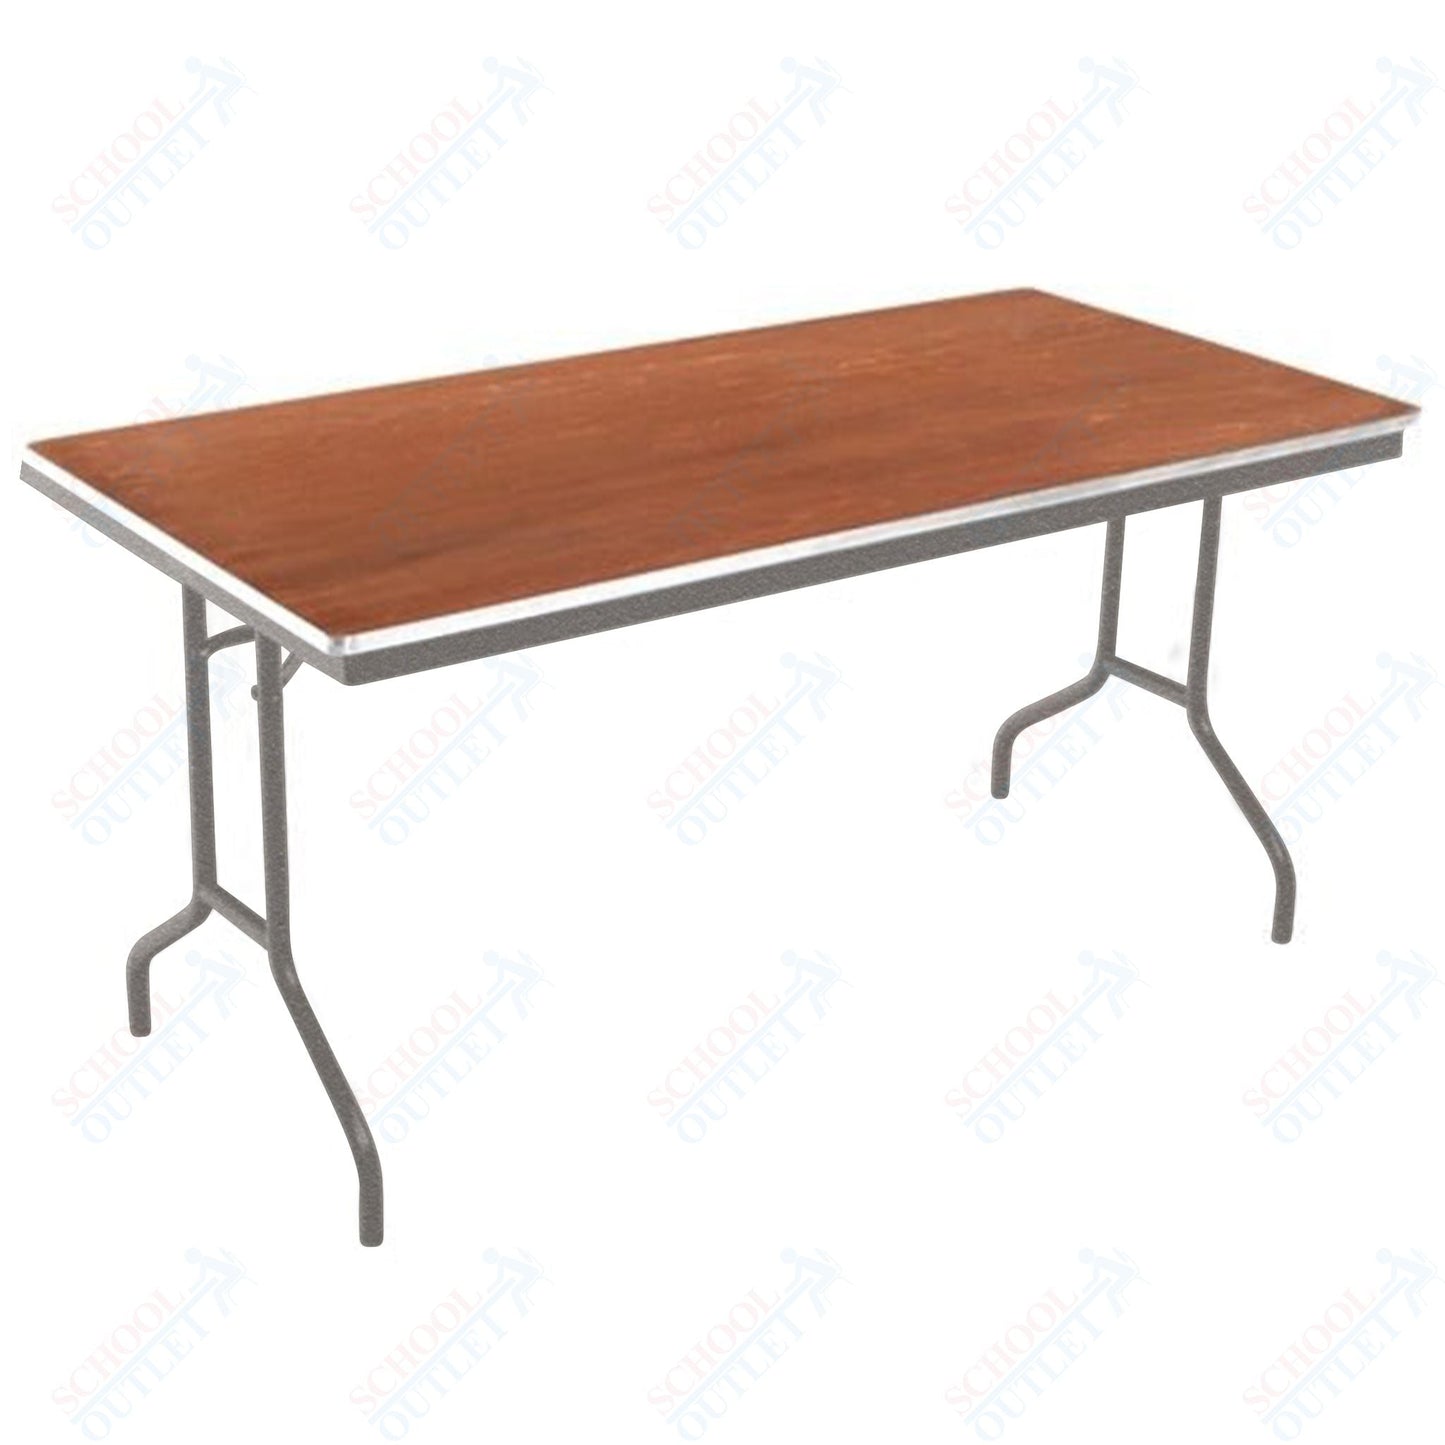 AmTab Folding Table - Plywood Stained and Sealed - Aluminum Edge - 18"W x 60"L x 29"H (AmTab AMT-185PA) - SchoolOutlet